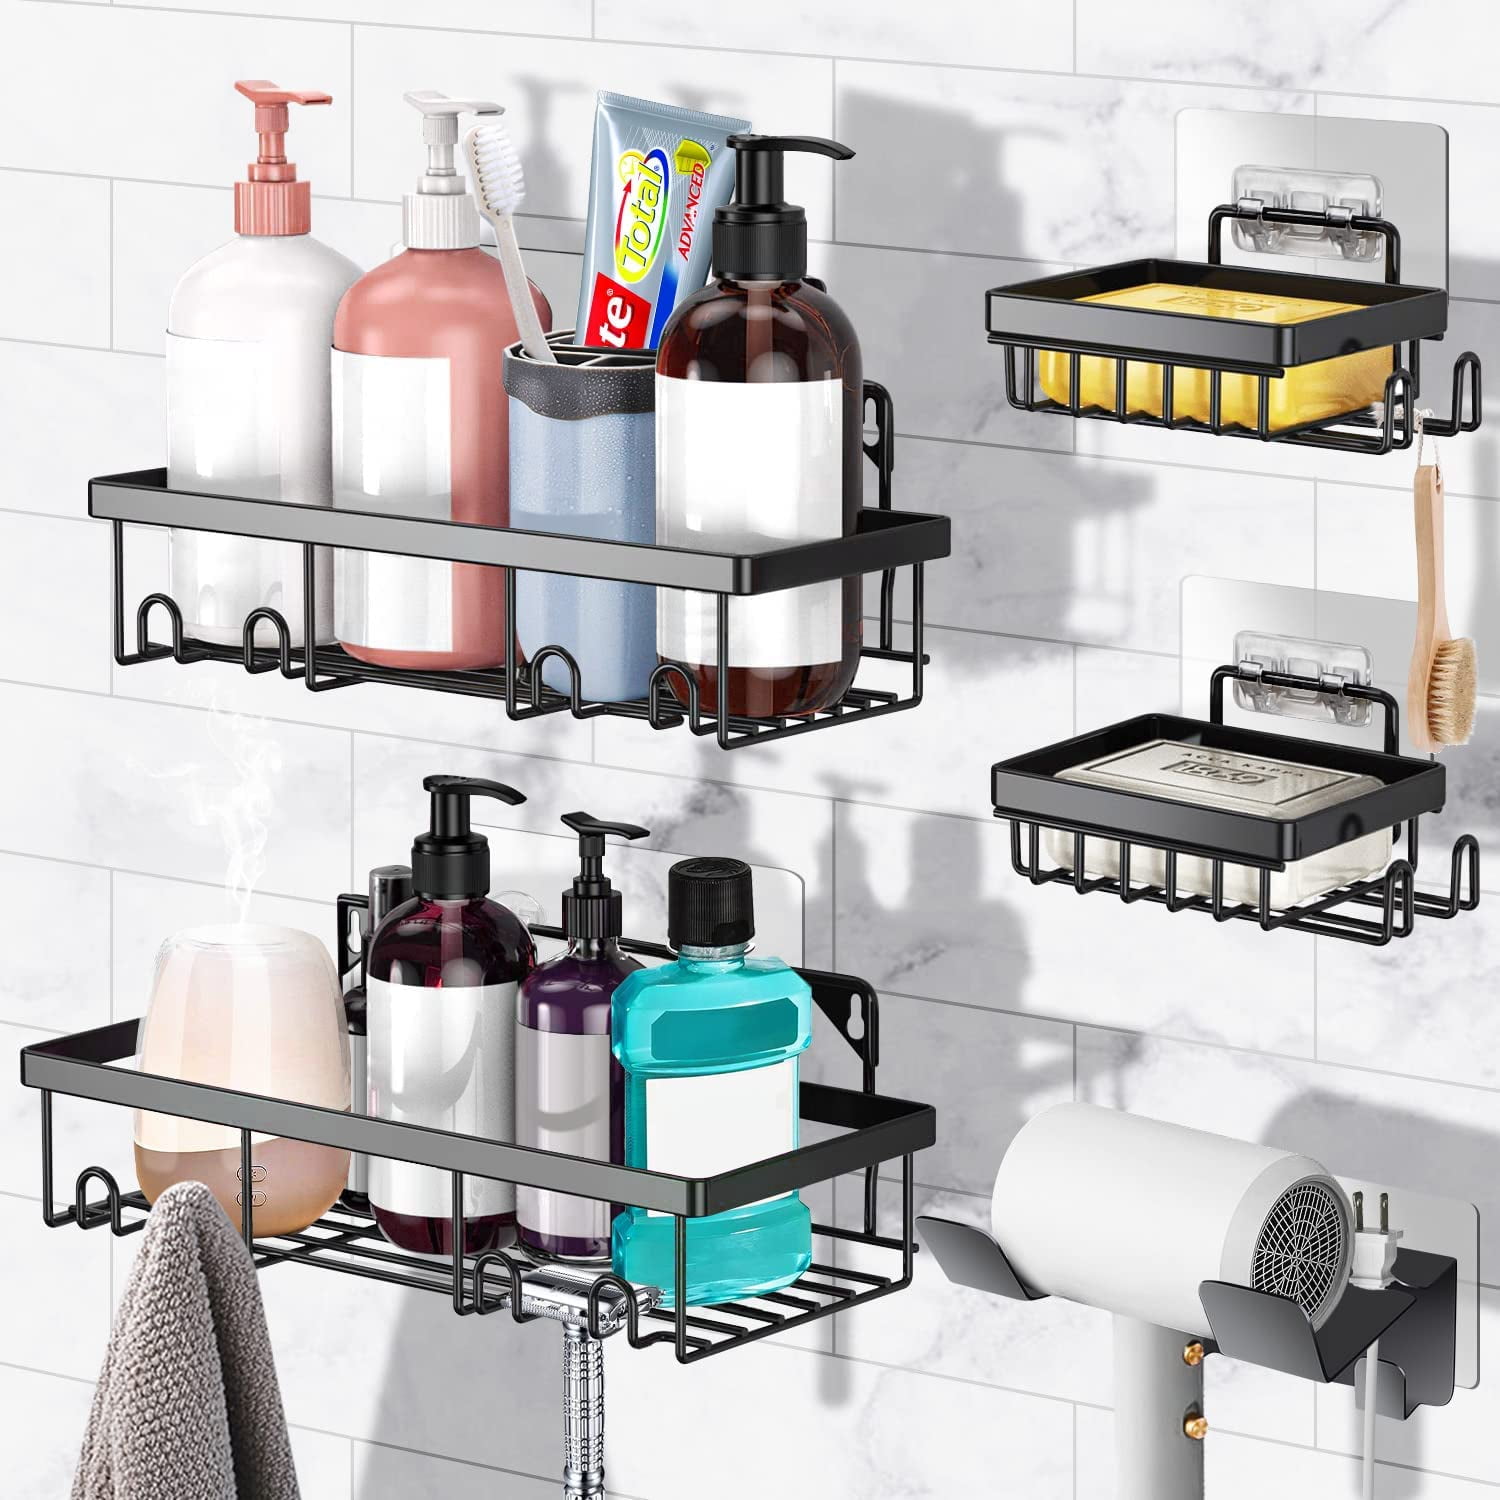 BESy Adhesive Bathroom Shower Corner Shelf Shower Corner Caddy with 2 Hooks, Drill Free with Glue or Wall Mount with Screws,No Damage Stainless